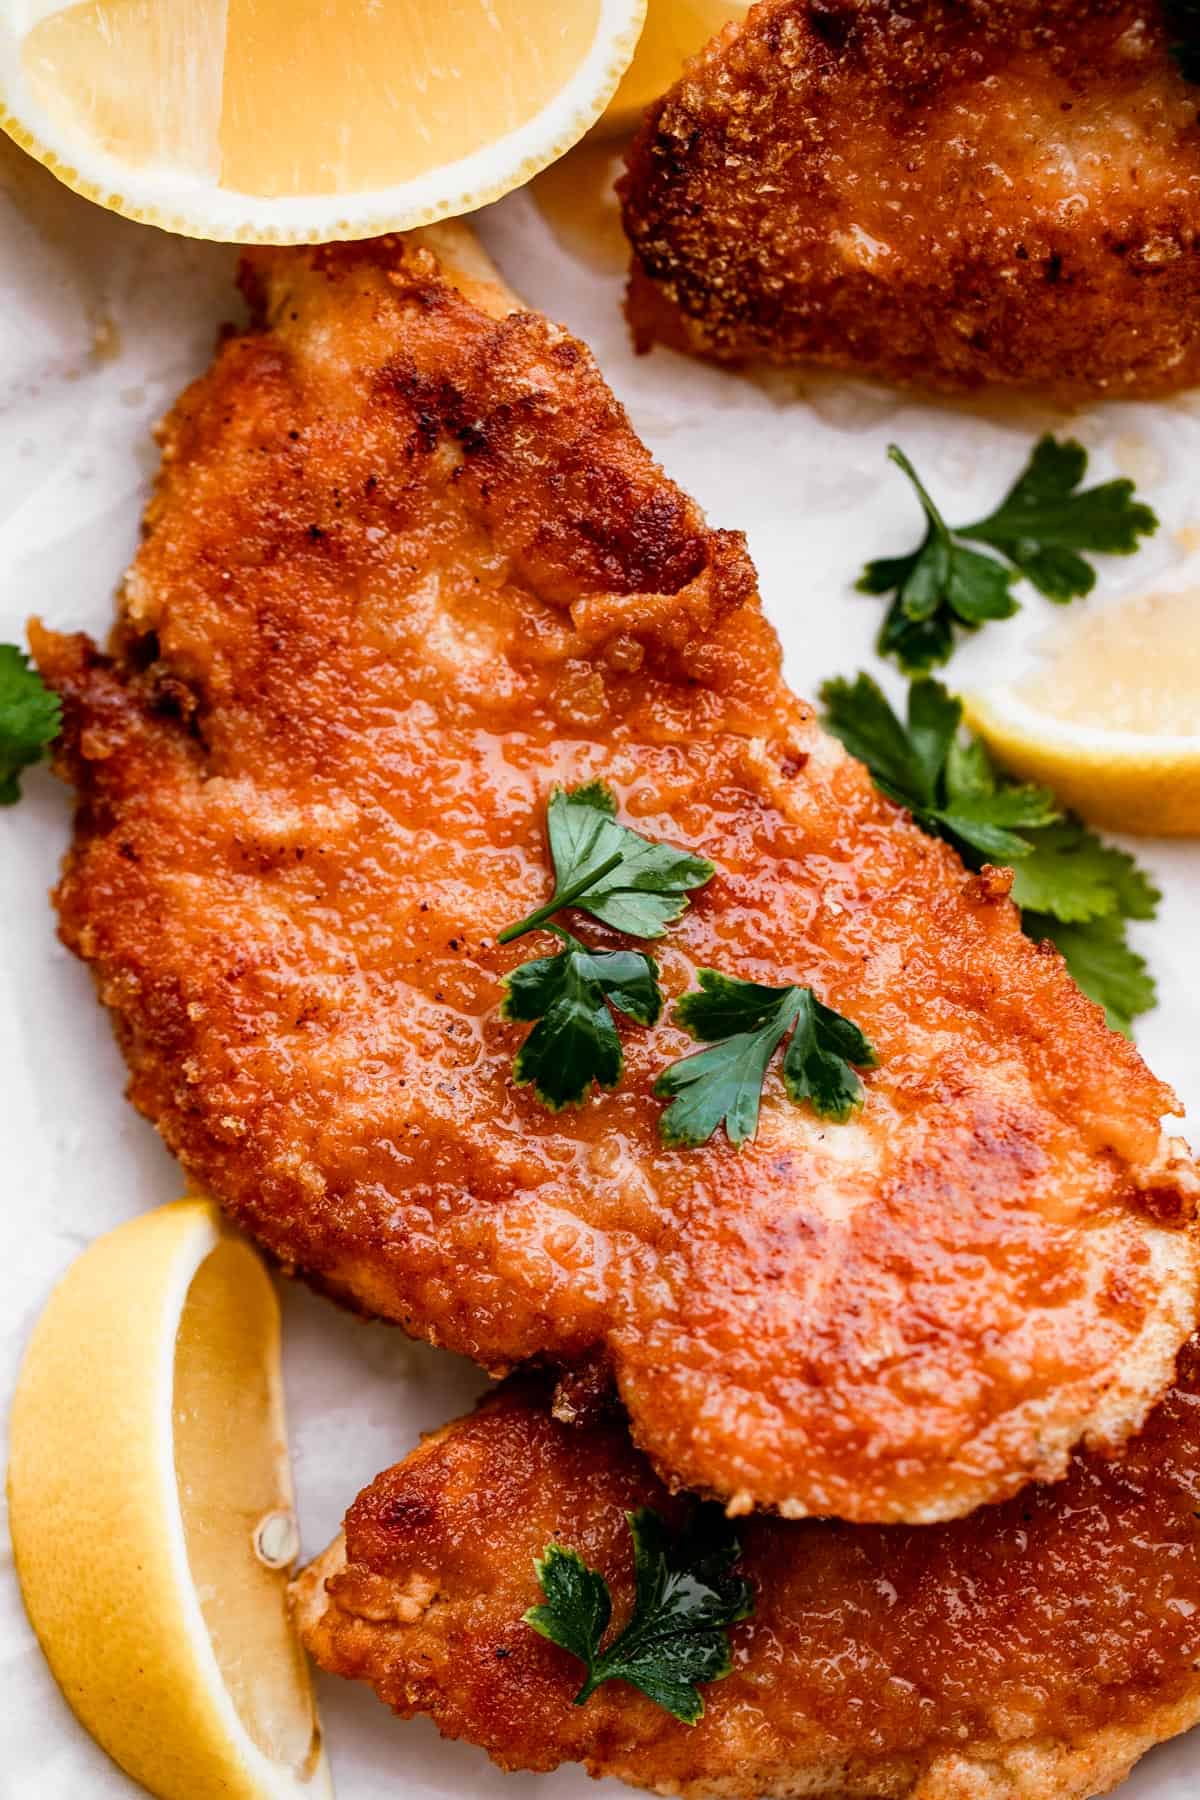 up close shot of chicken schnitzel garnished with parsley and lemon wedges placed around the chicken.